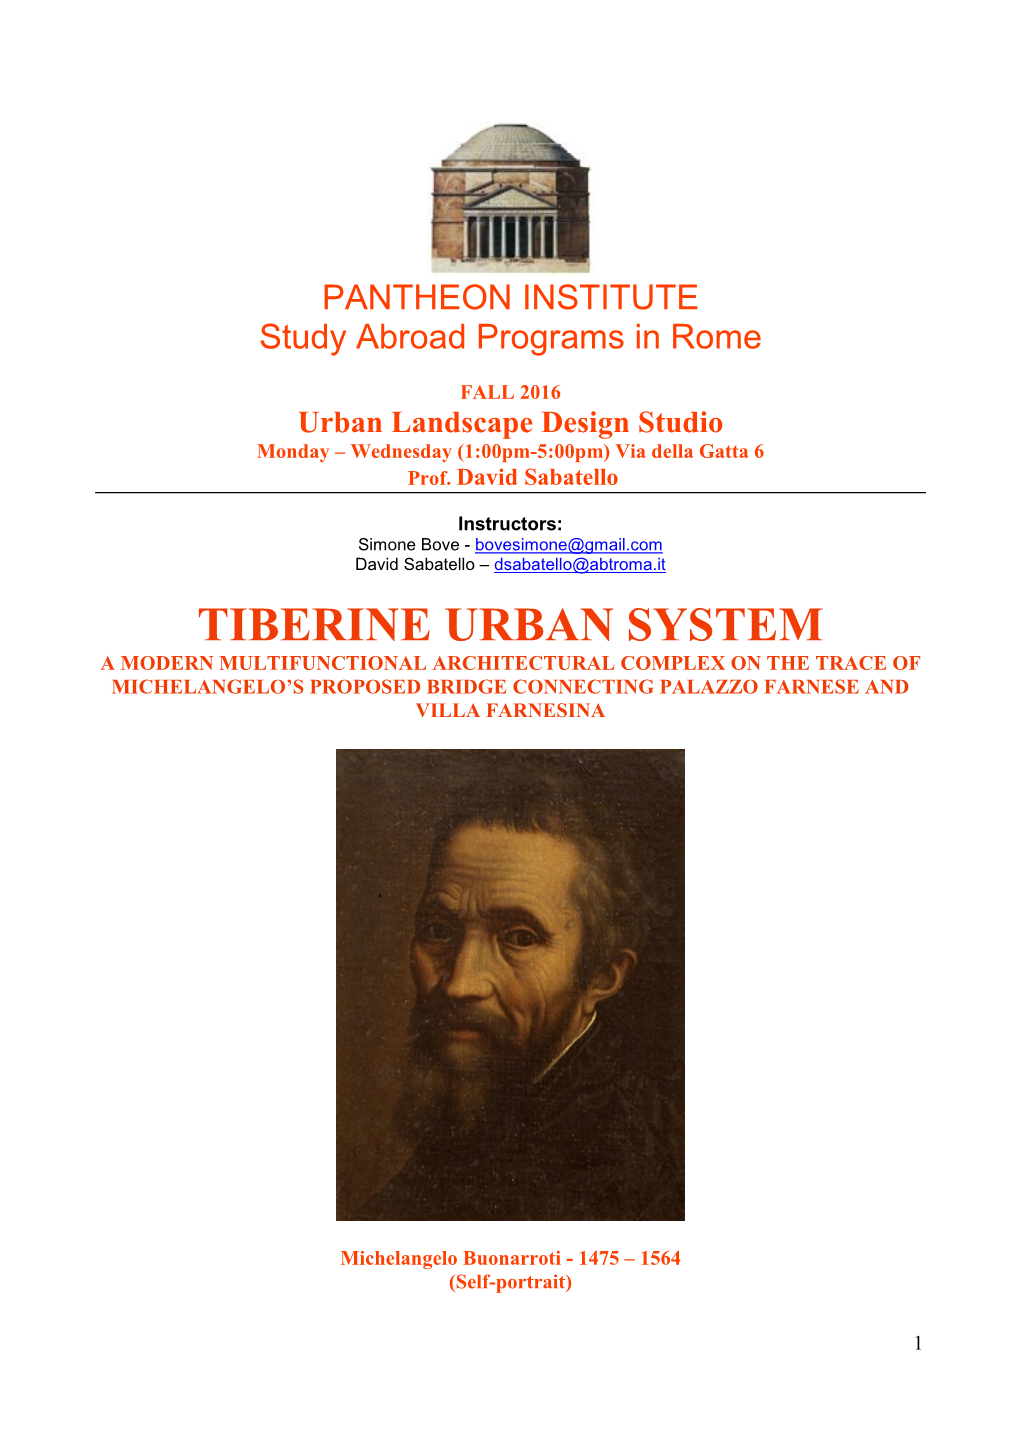 Tiberine Urban System a Modern Multifunctional Architectural Complex on the Trace of Michelangelo’S Proposed Bridge Connecting Palazzo Farnese and Villa Farnesina